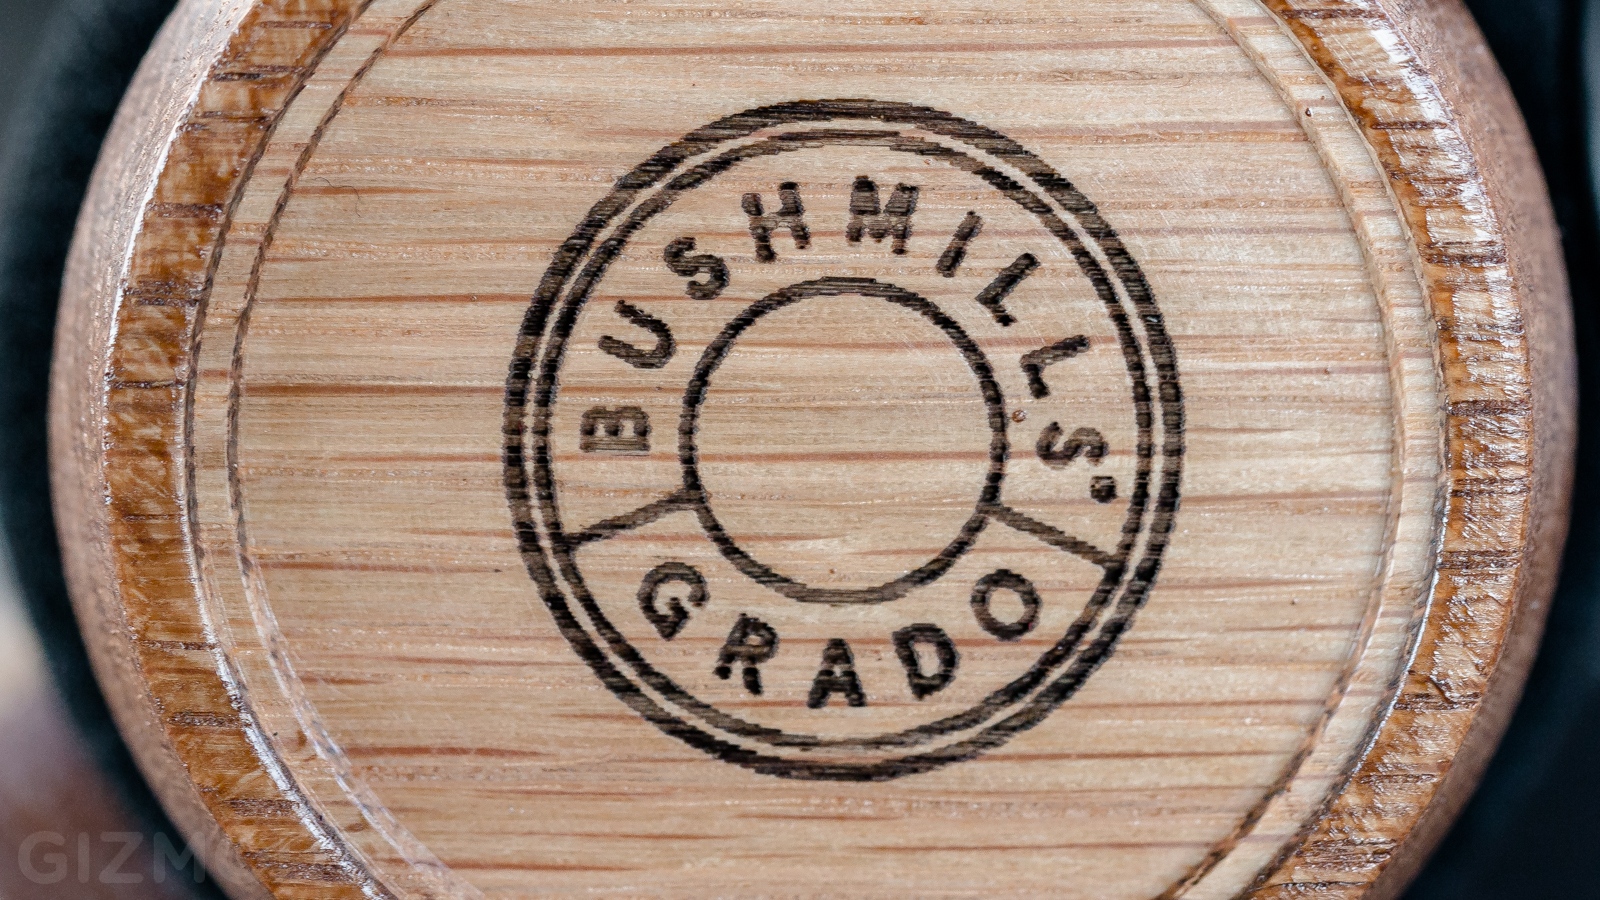 ​Grado Labs Made Gorgeous Cans Out Of Irish Whisky Barrels